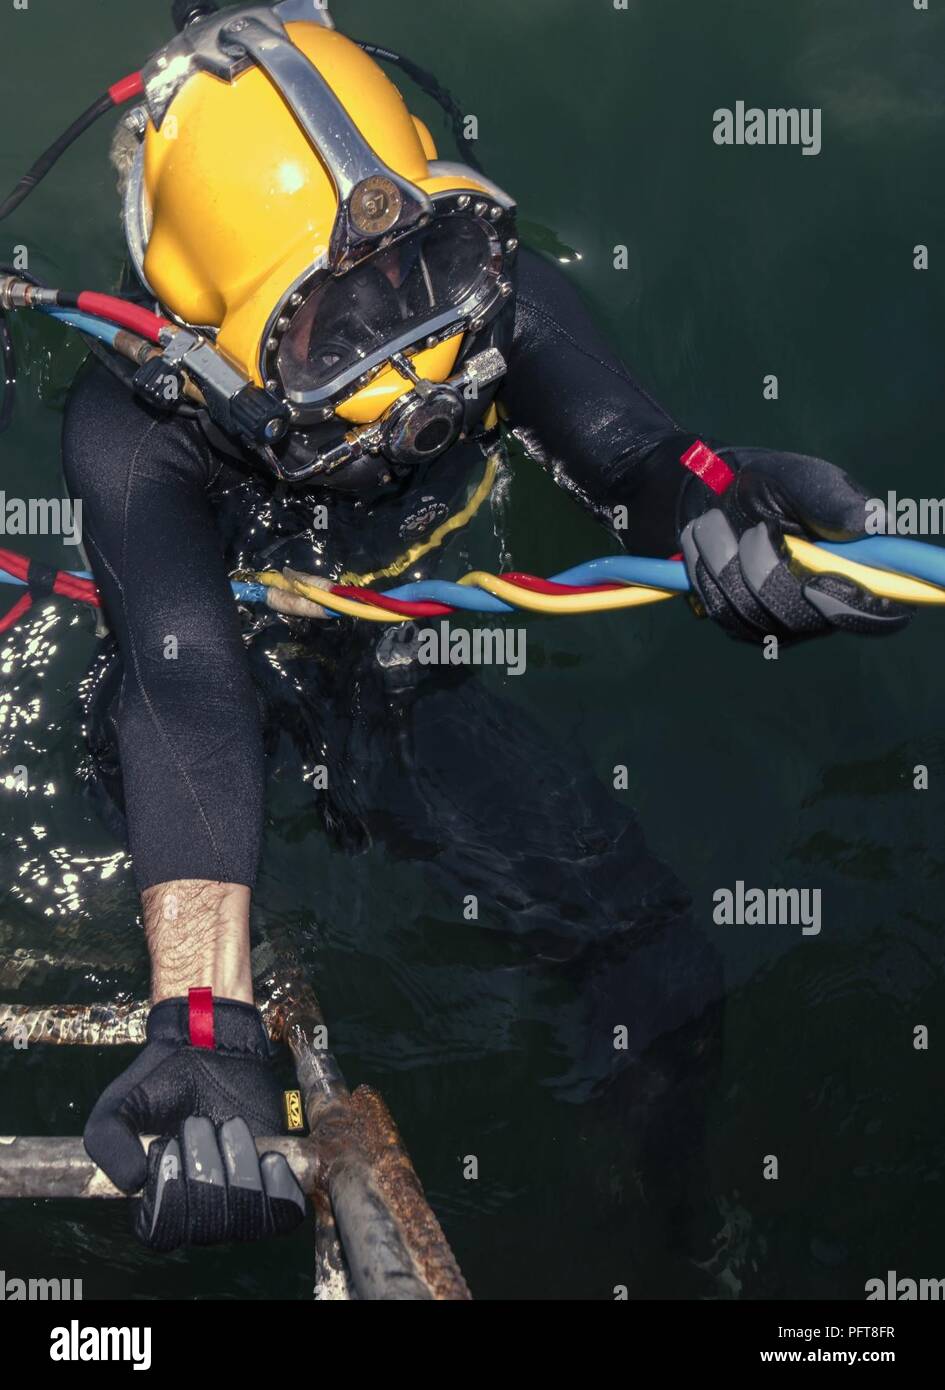 U.S. Army Sgt. Eoin Audet, assigned to 7th Engineer Dive Detachment, 84th Engineer Battalion, 130th Engineer Brigade, prepares to complete a dive during an underwater recovery operation off the coast of Hoang Mai, Vietnam, May 24, 2018. The recovery effort was conducted by the Defense POW/MIA Accounting Agency (DPAA) to locate service members who went missing during the Vietnam War. DPAA conducts global search, recovery and laboratory operations to provide the fullest possible accounting for our missing personnel to their families and the nation. Stock Photo